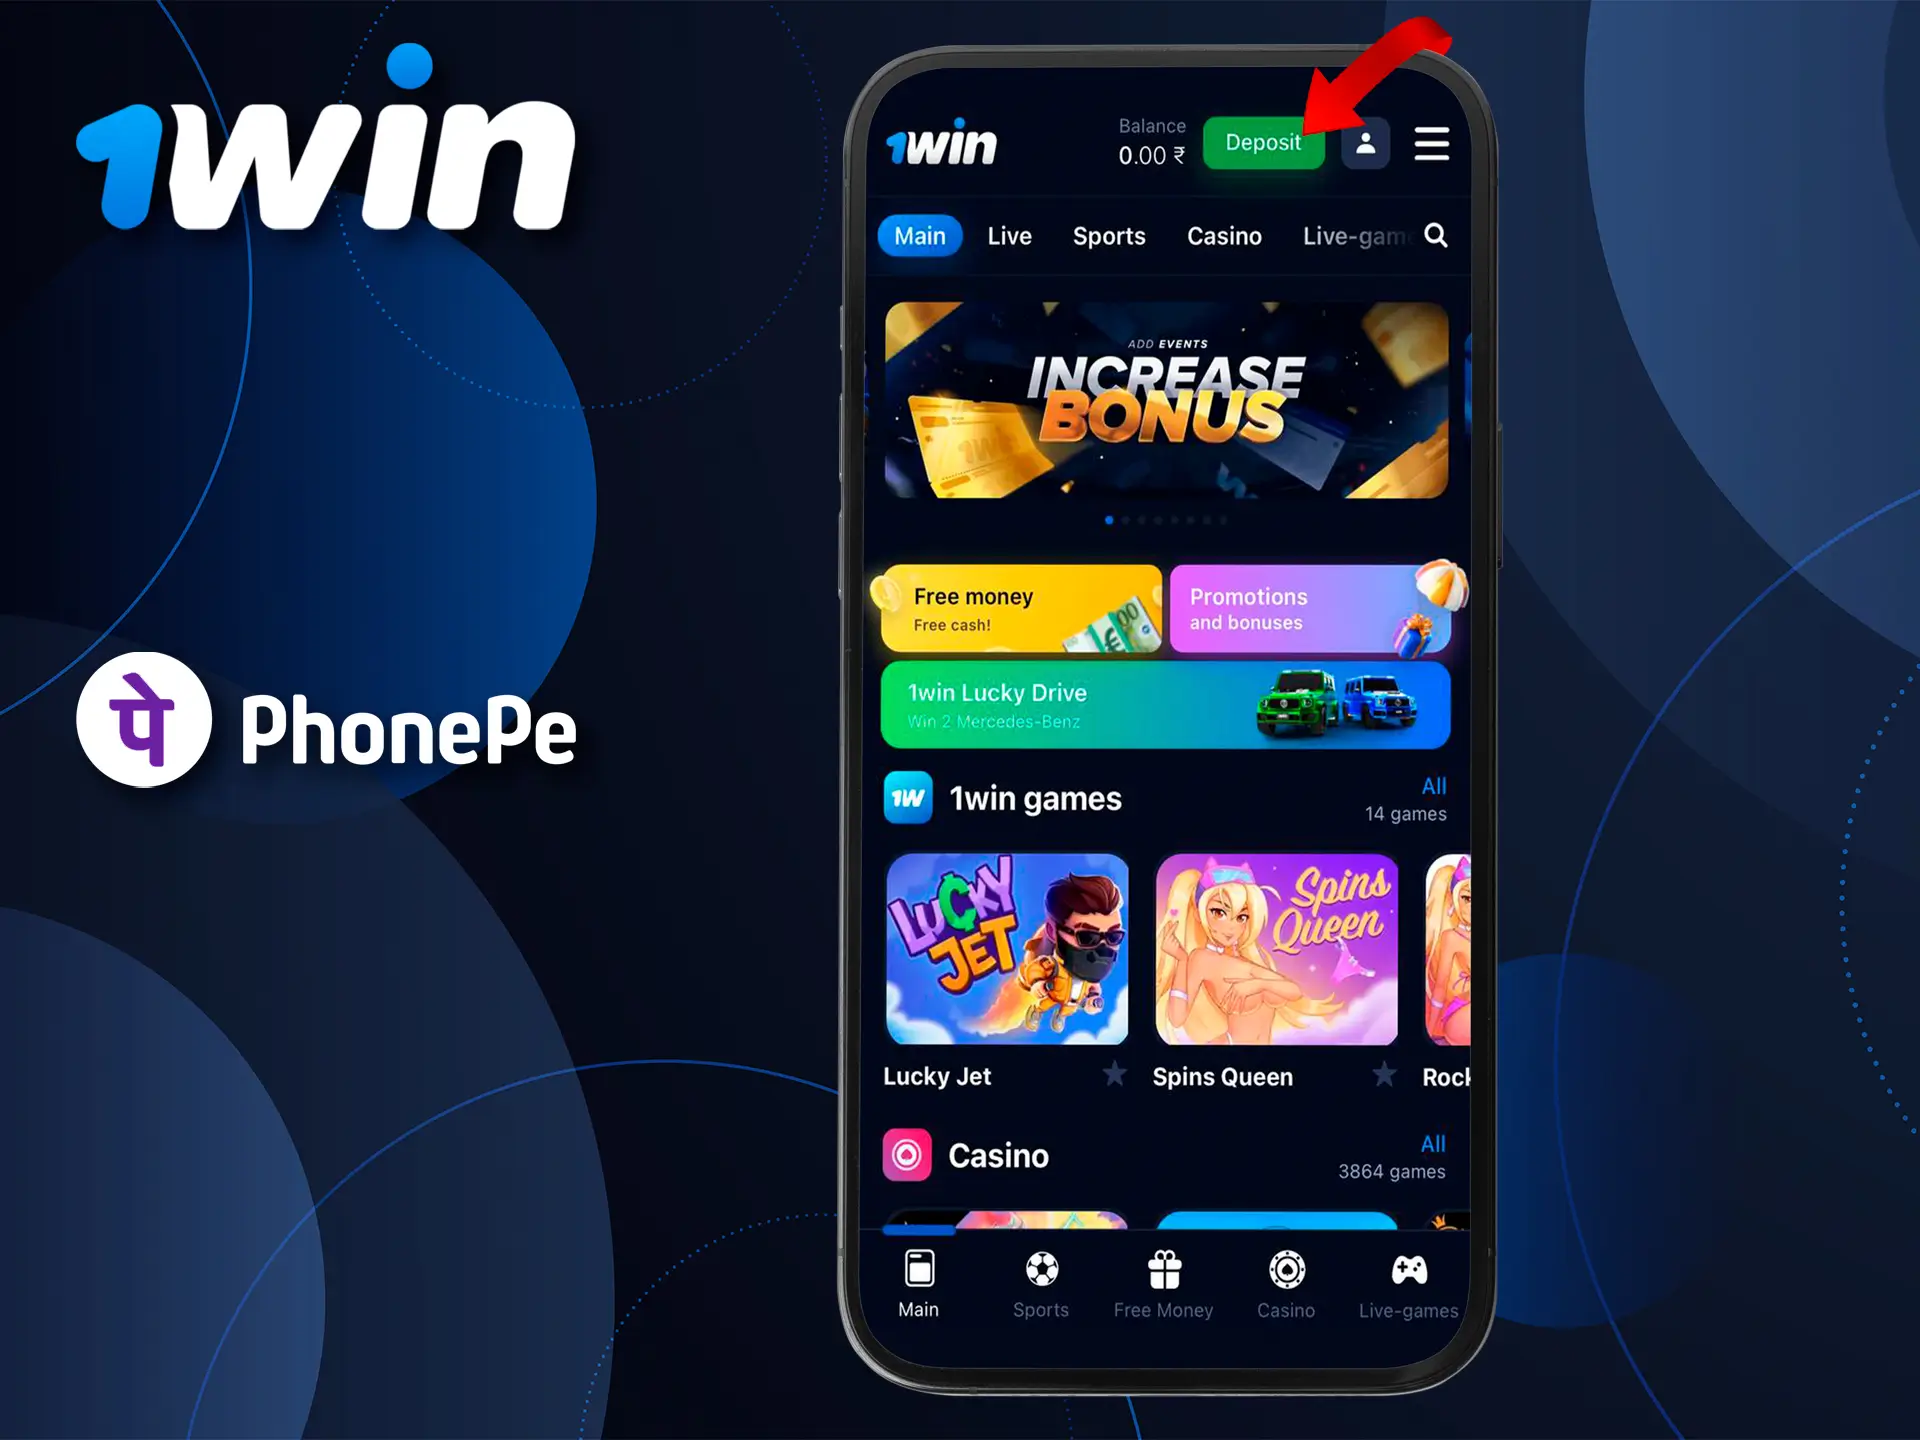 Enter the 1Win website in the browser of your mobile device.